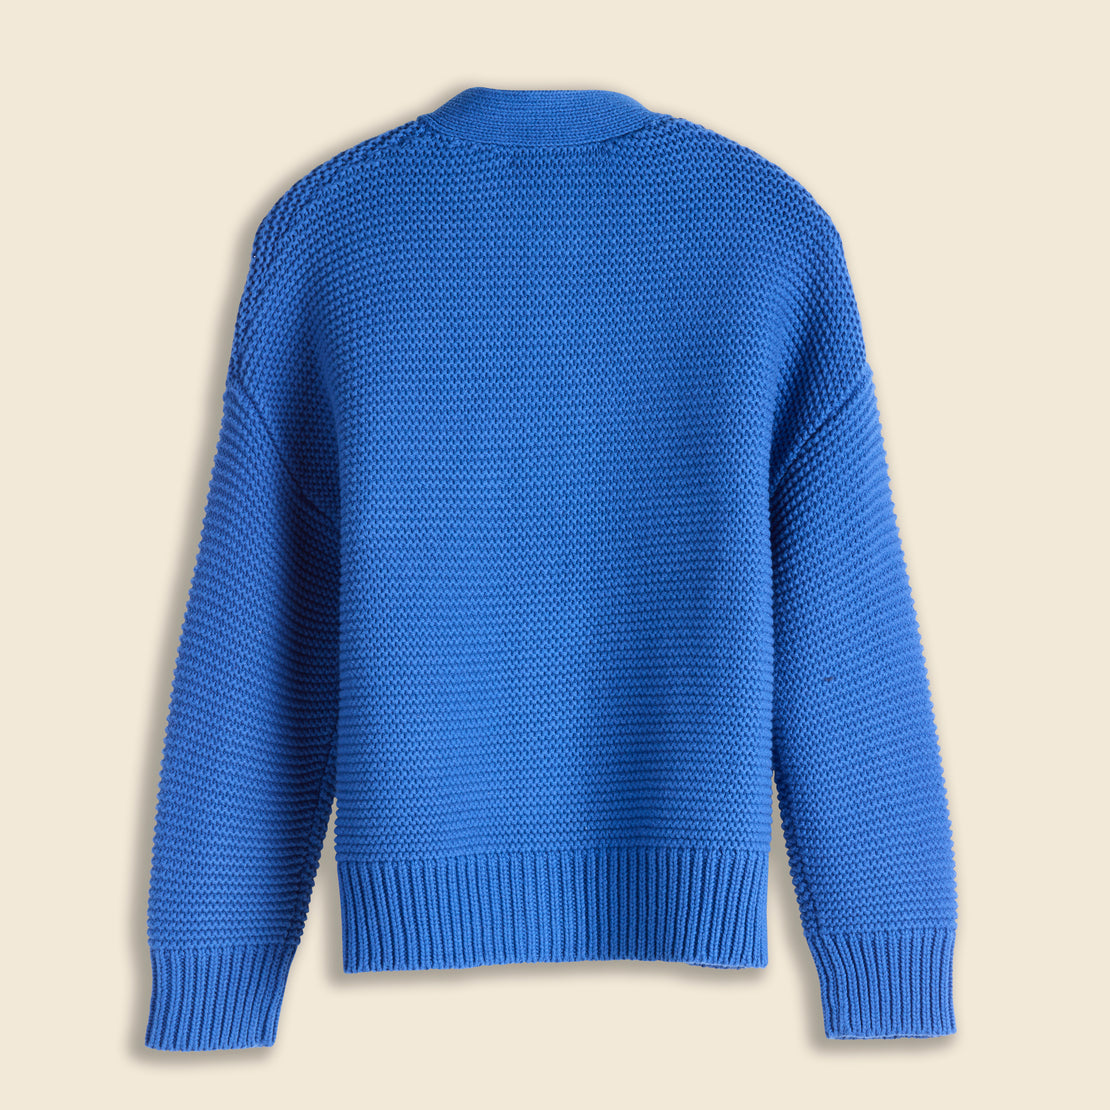 Nico Cardigan - Cosmic Blue - Alex Mill - STAG Provisions - W - Tops - Sweater